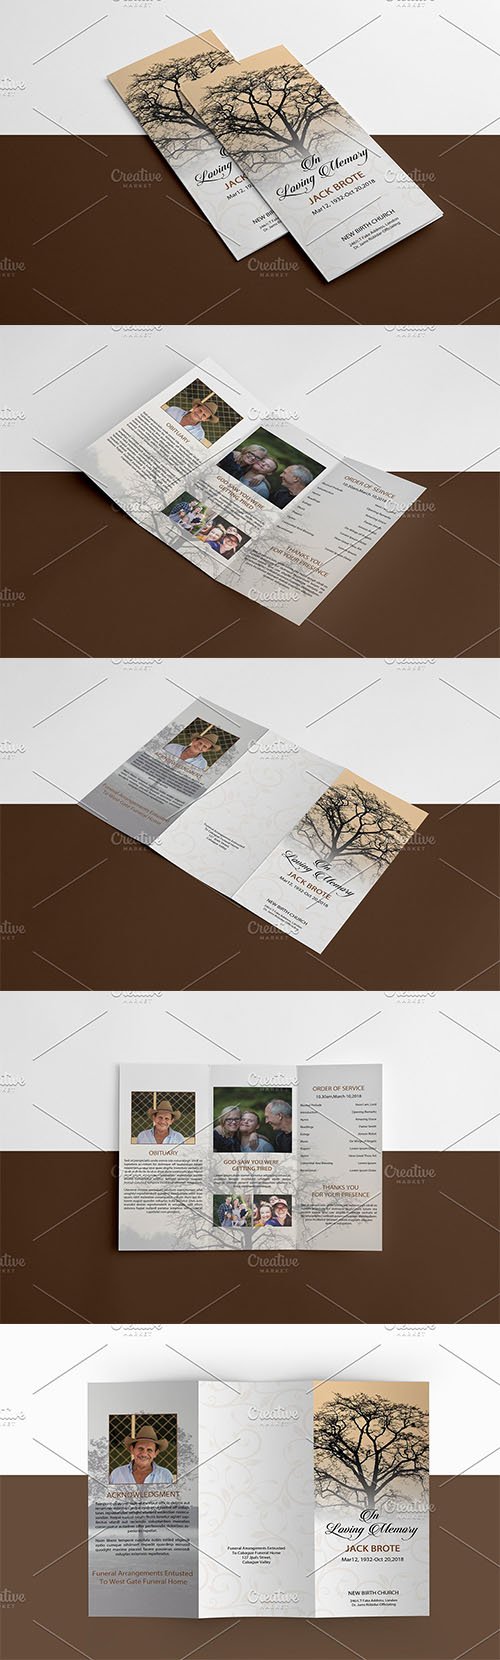 Trifold Funeral Template - V849 3283833